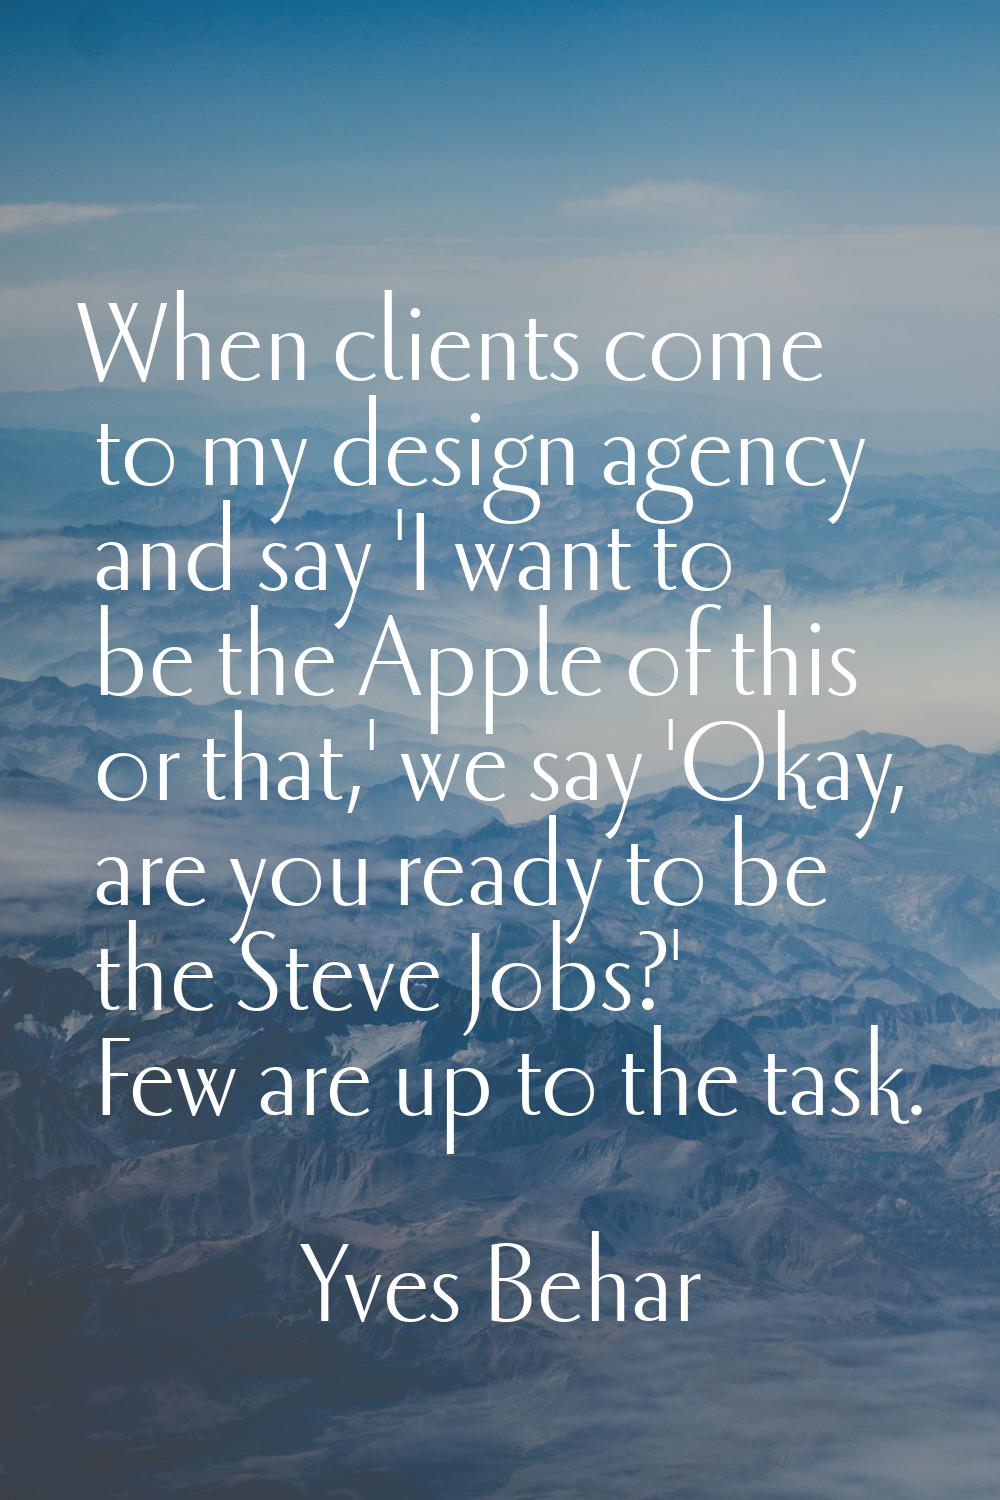 When clients come to my design agency and say 'I want to be the Apple of this or that,' we say 'Oka